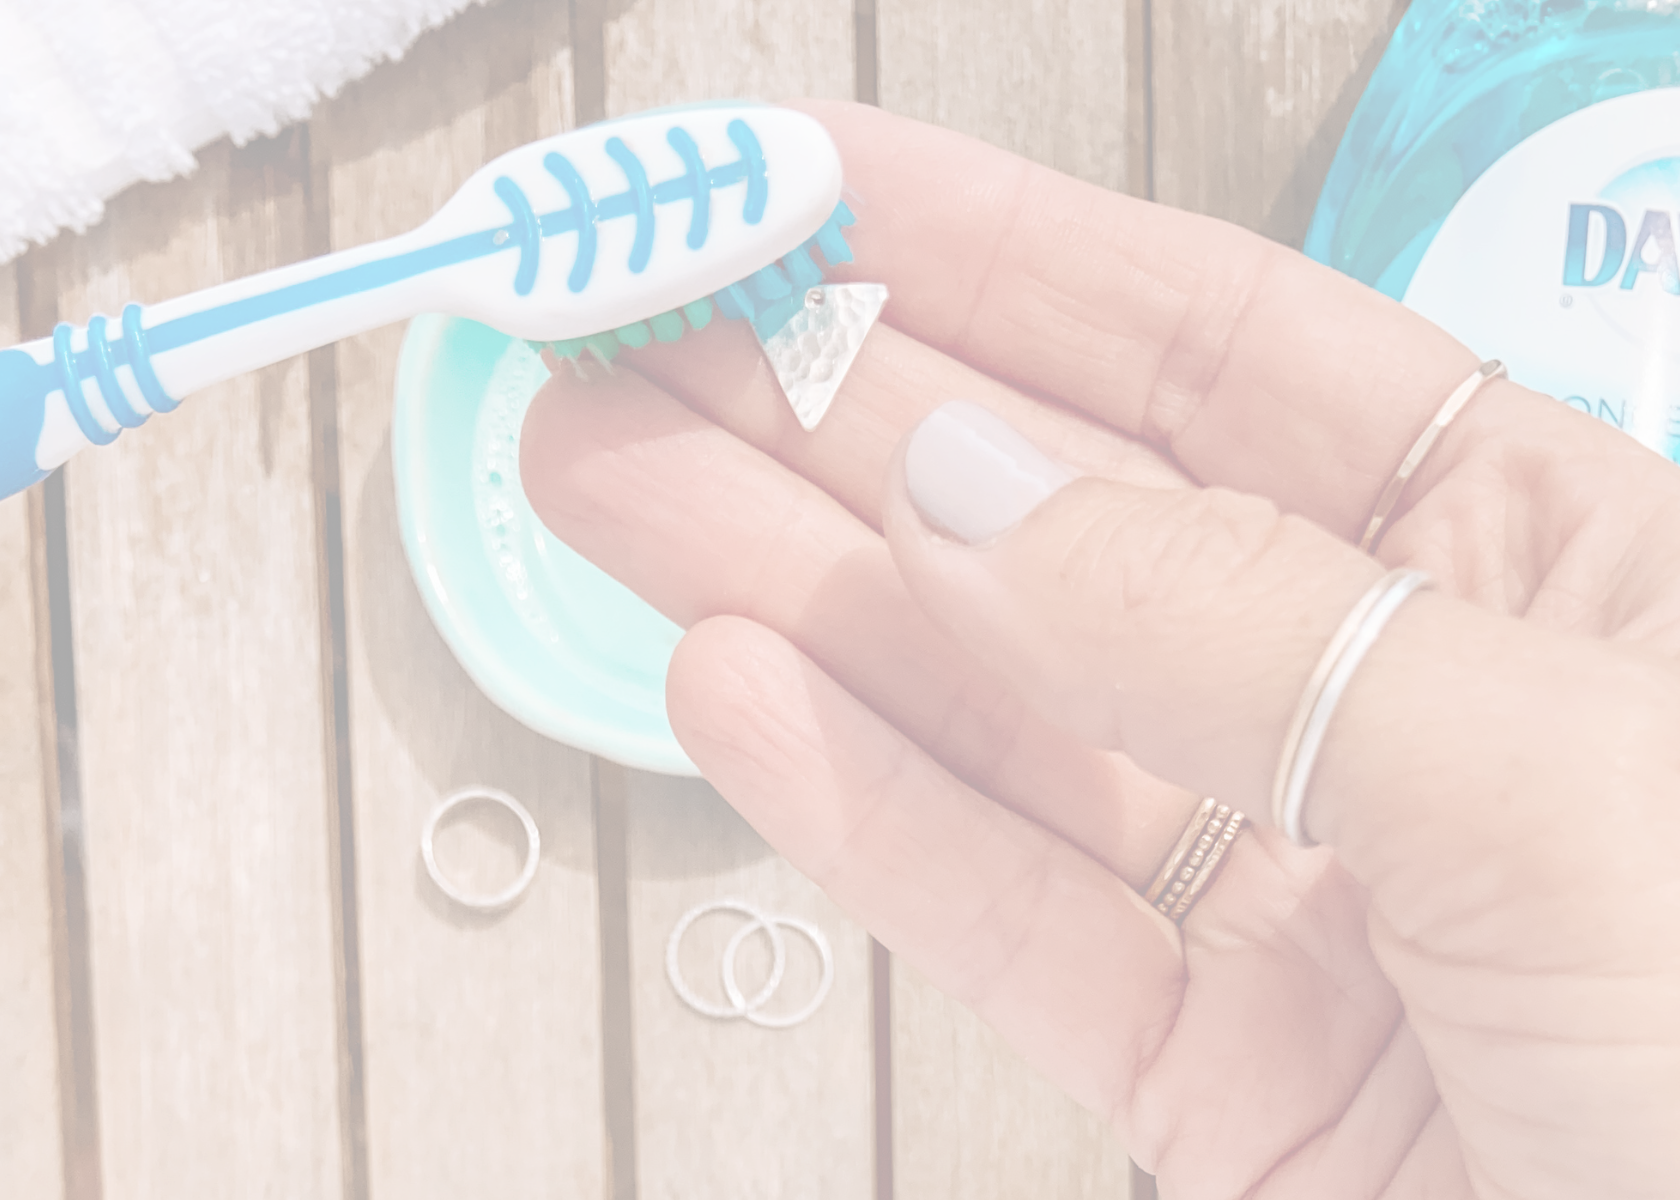 How to Use Toothpaste to Clean Silver Jewelry: 15 Steps